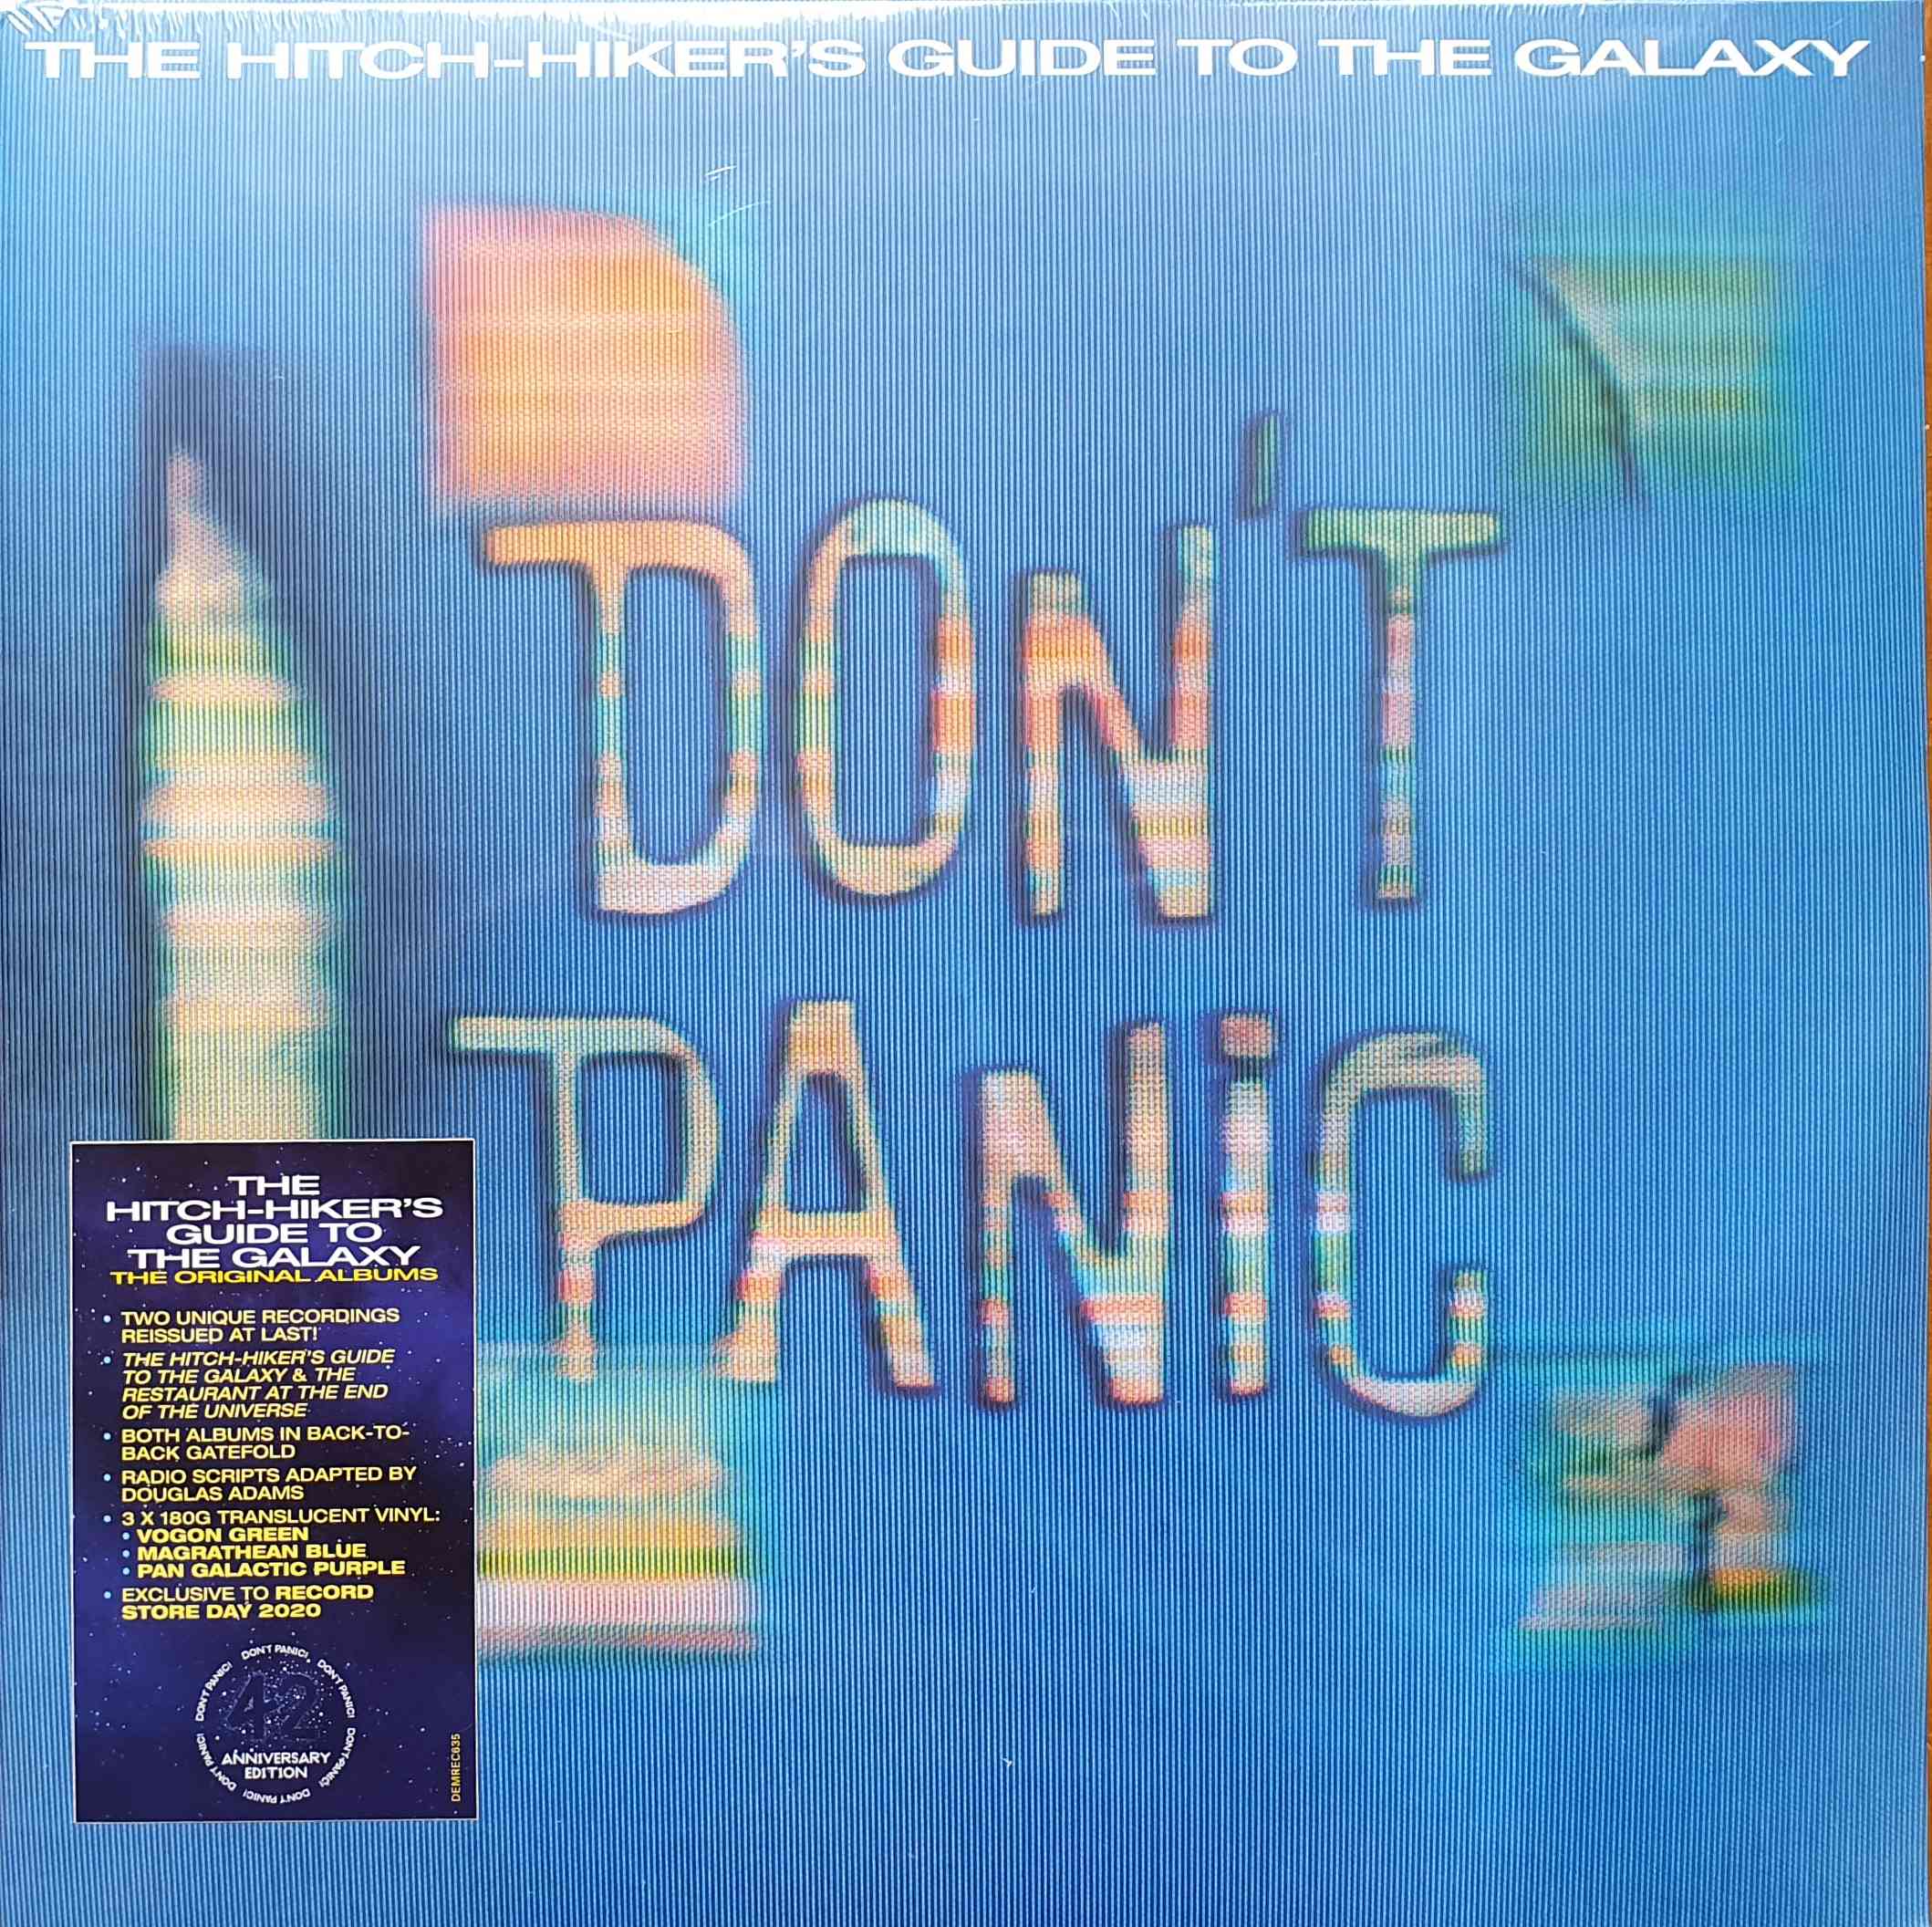 Picture of The hitch-hiker's guide to the galaxy / The restaurant at the end of the universe - Record Store Day 2020 by artist Douglas Adams from the BBC albums - Records and Tapes library